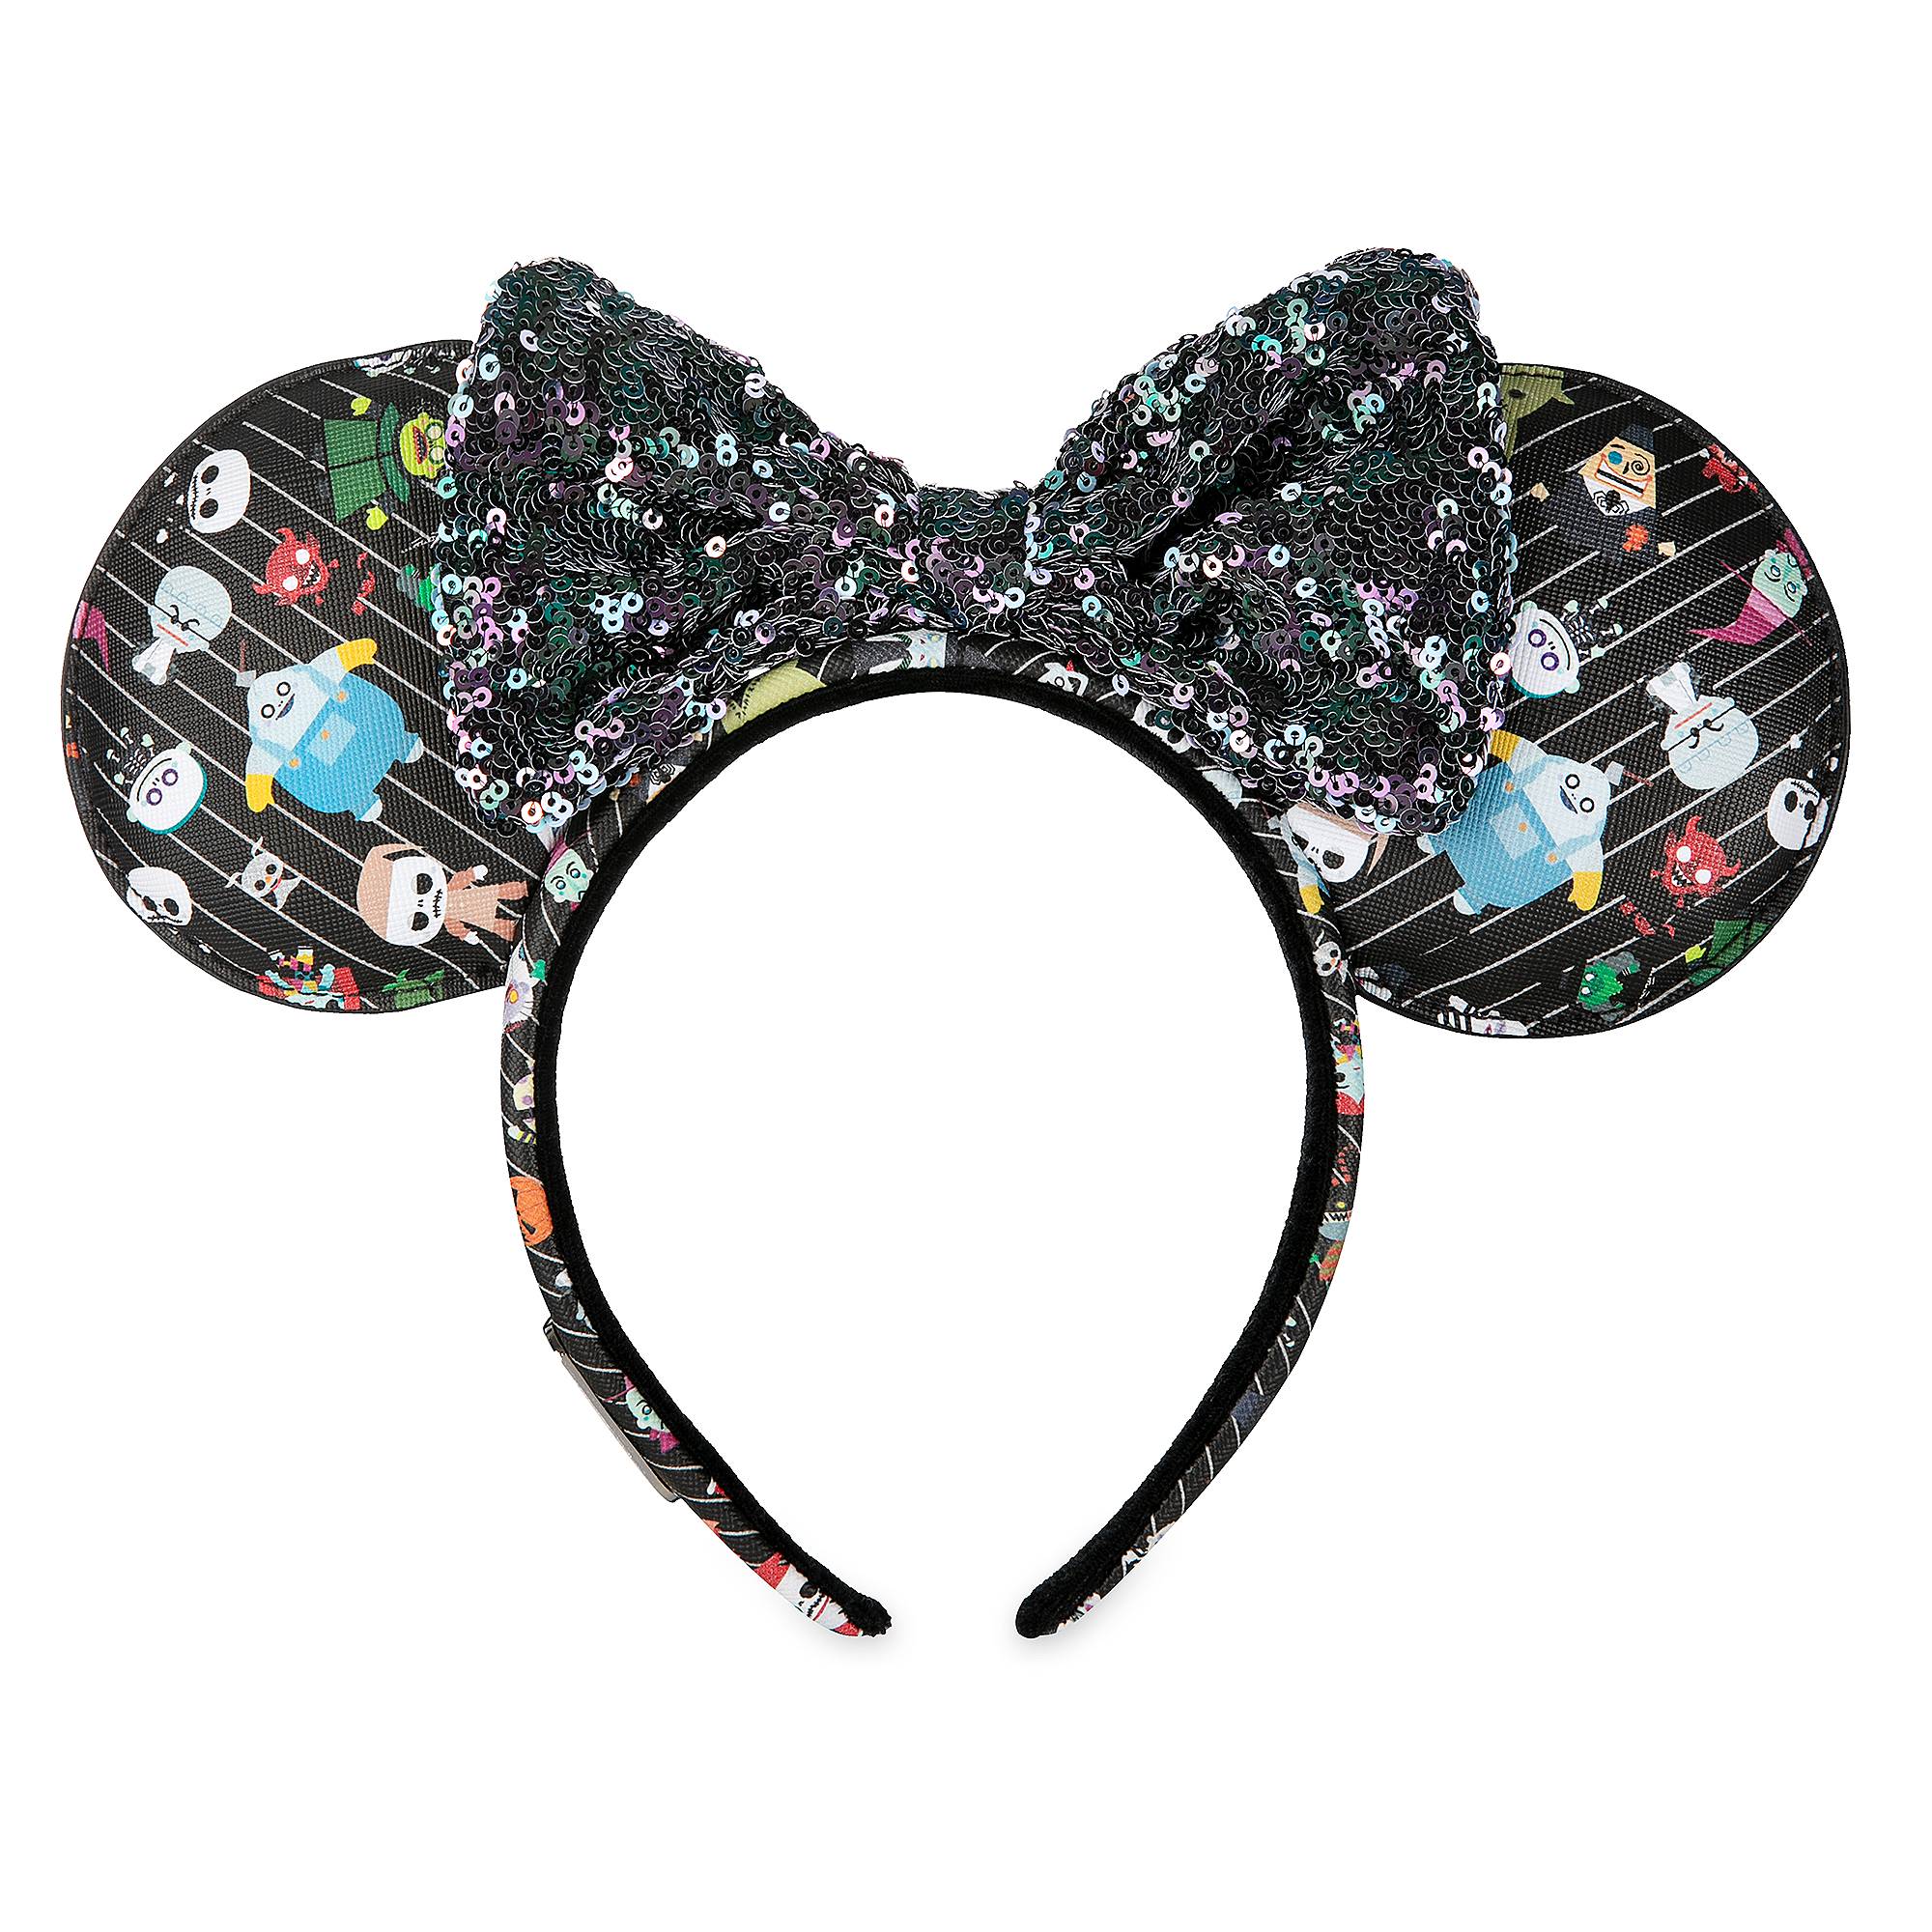 The Nightmare Before Christmas Minnie Mouse Ear Headband by Loungefly image